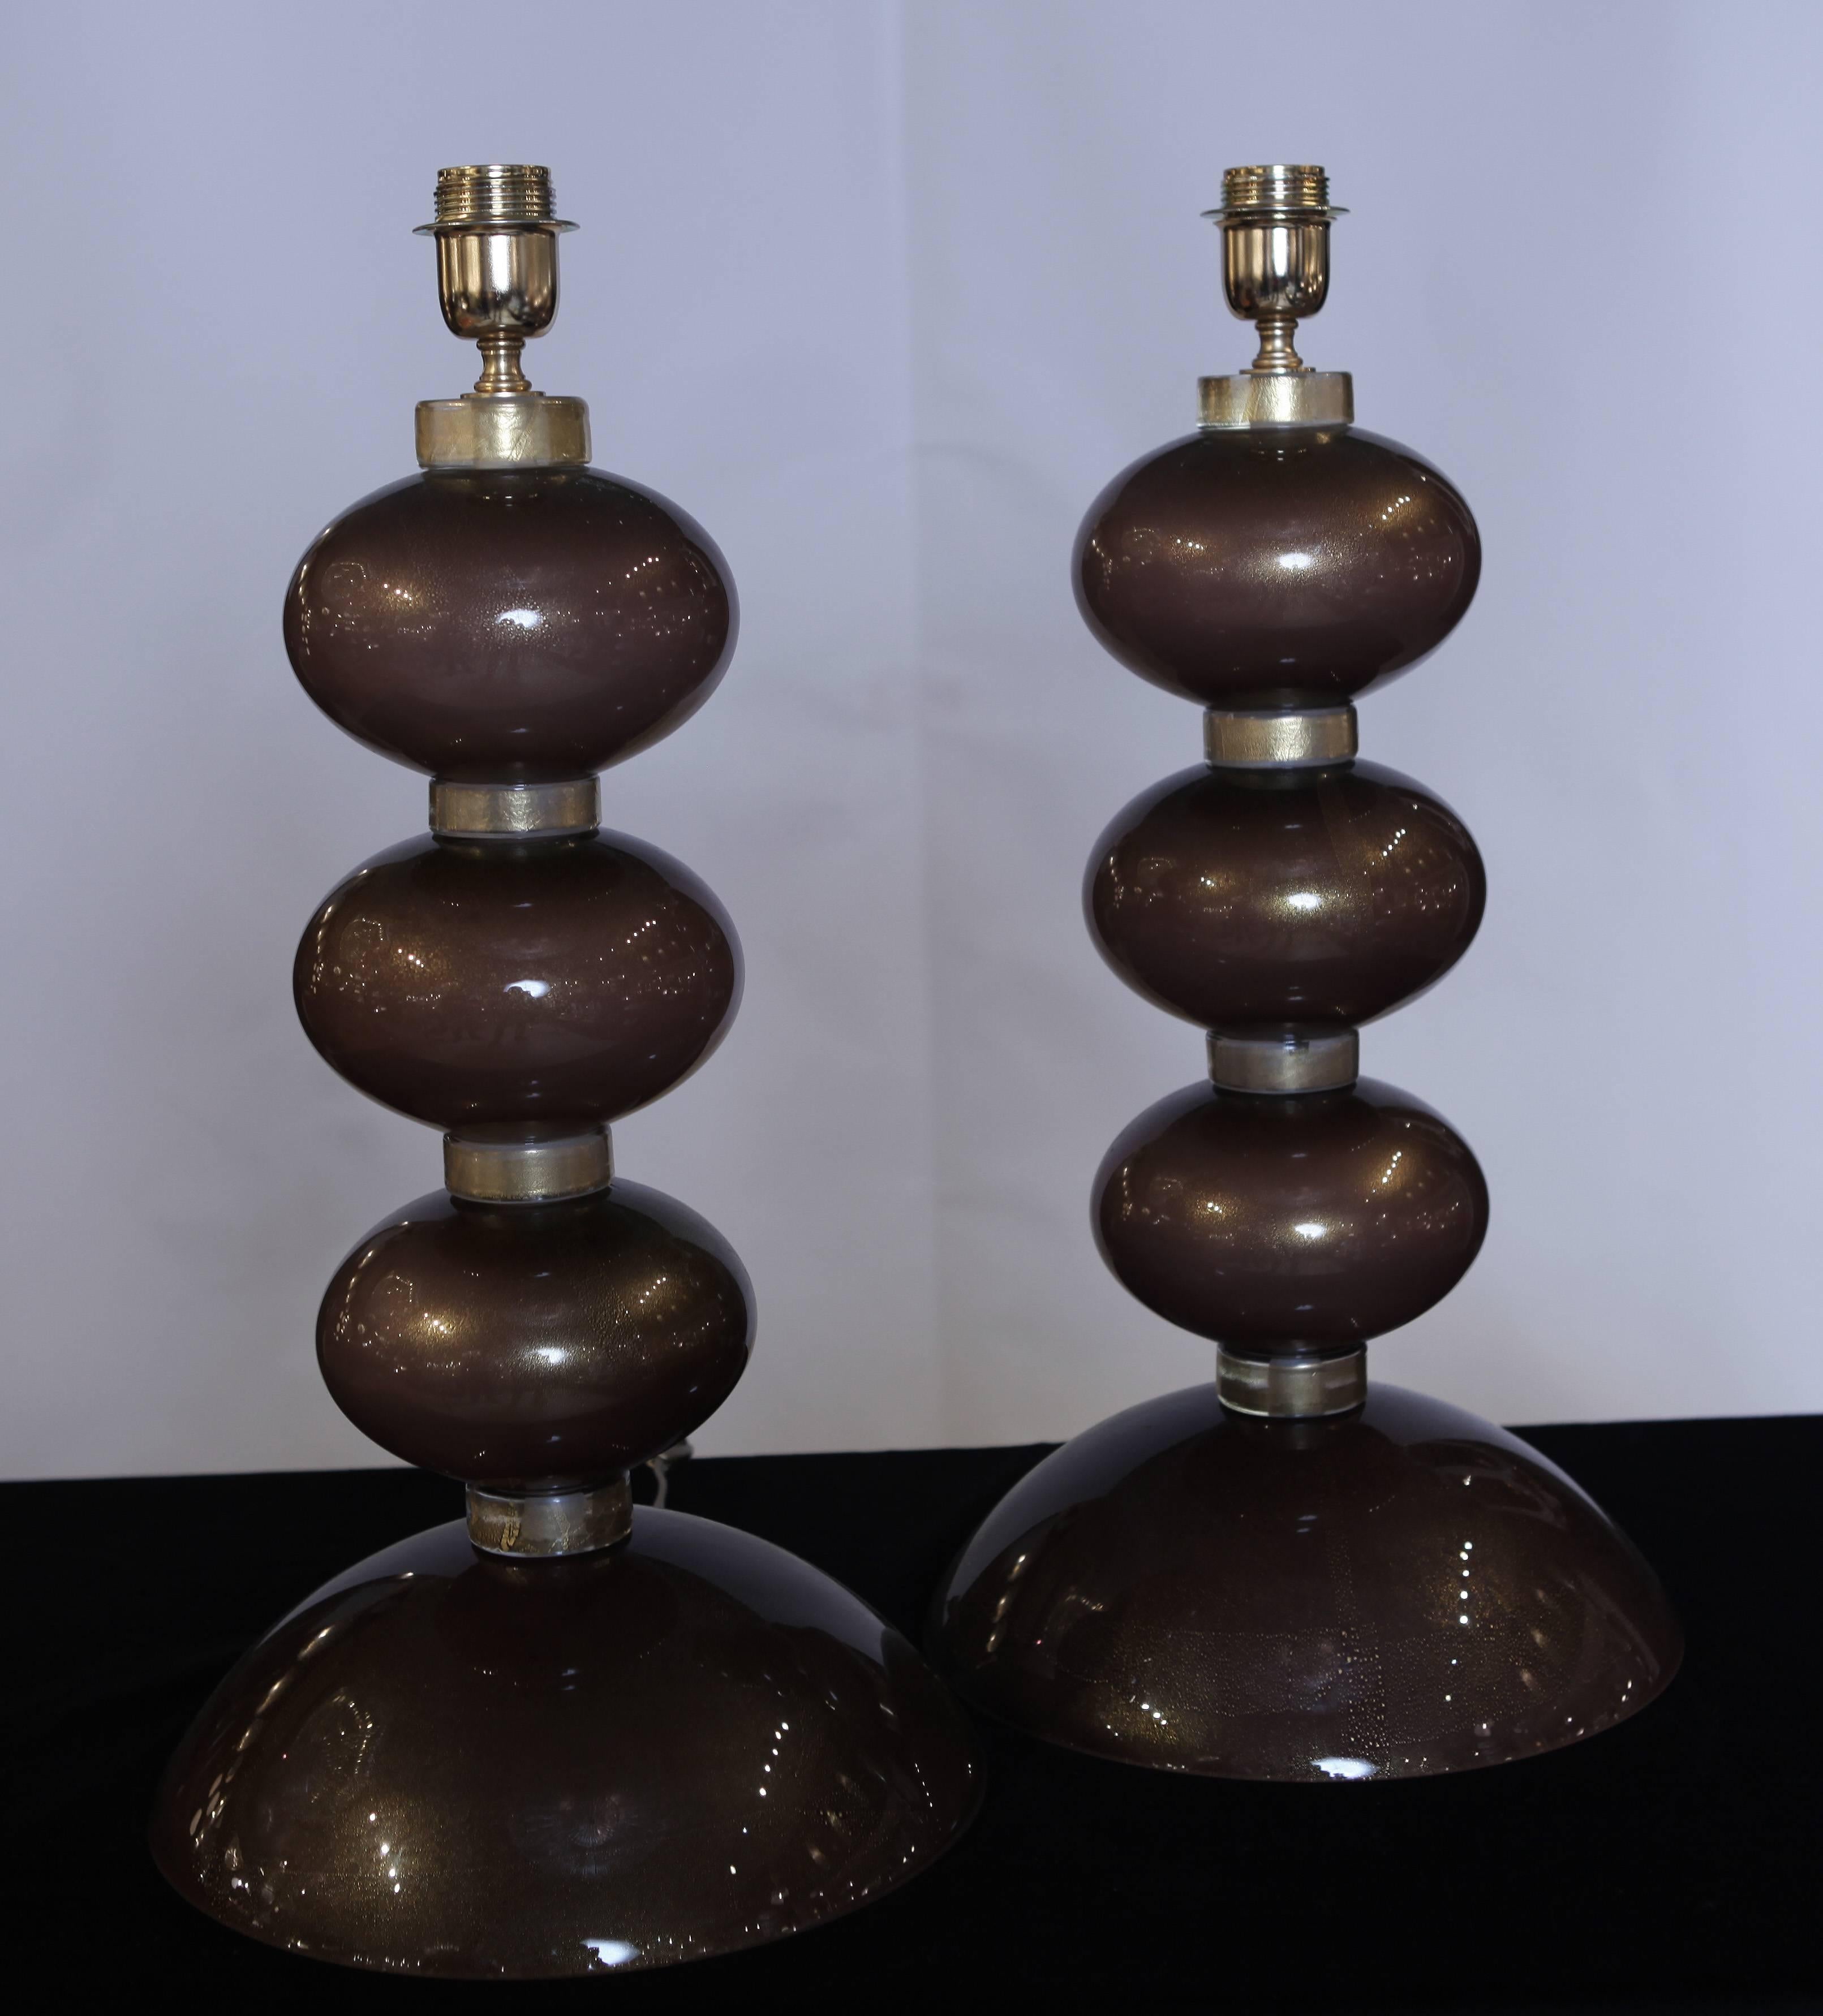 The table lamps are made up of three oval bronzed Murano glass pieces sitting on a large base. The components are fused to Murano glass discs with gold inclusion.
   